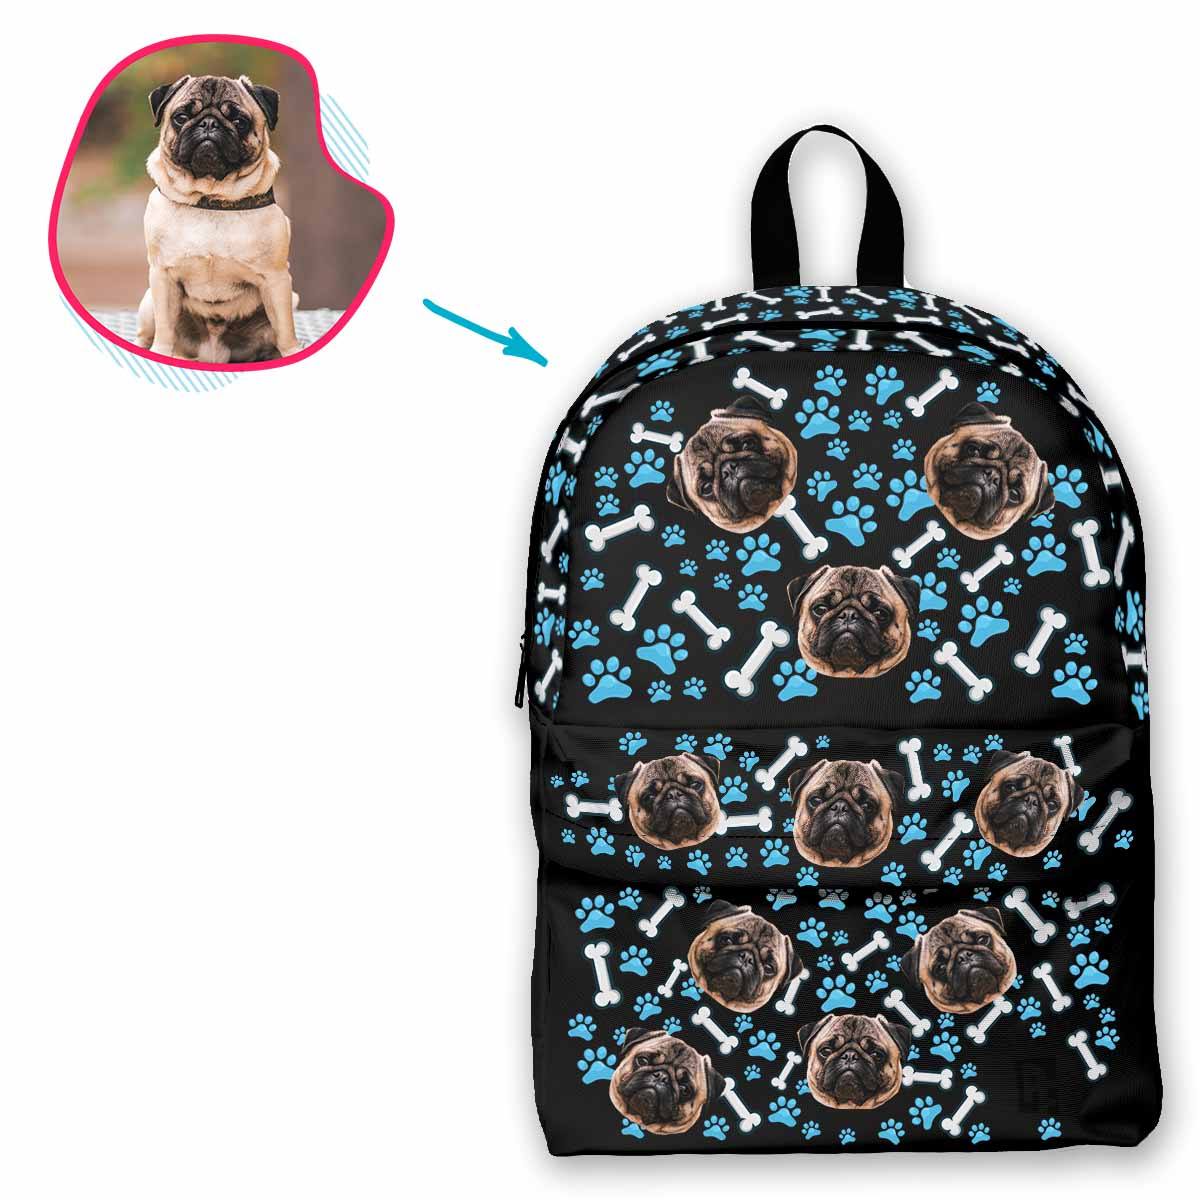 dark Dog classic backpack personalized with photo of face printed on it